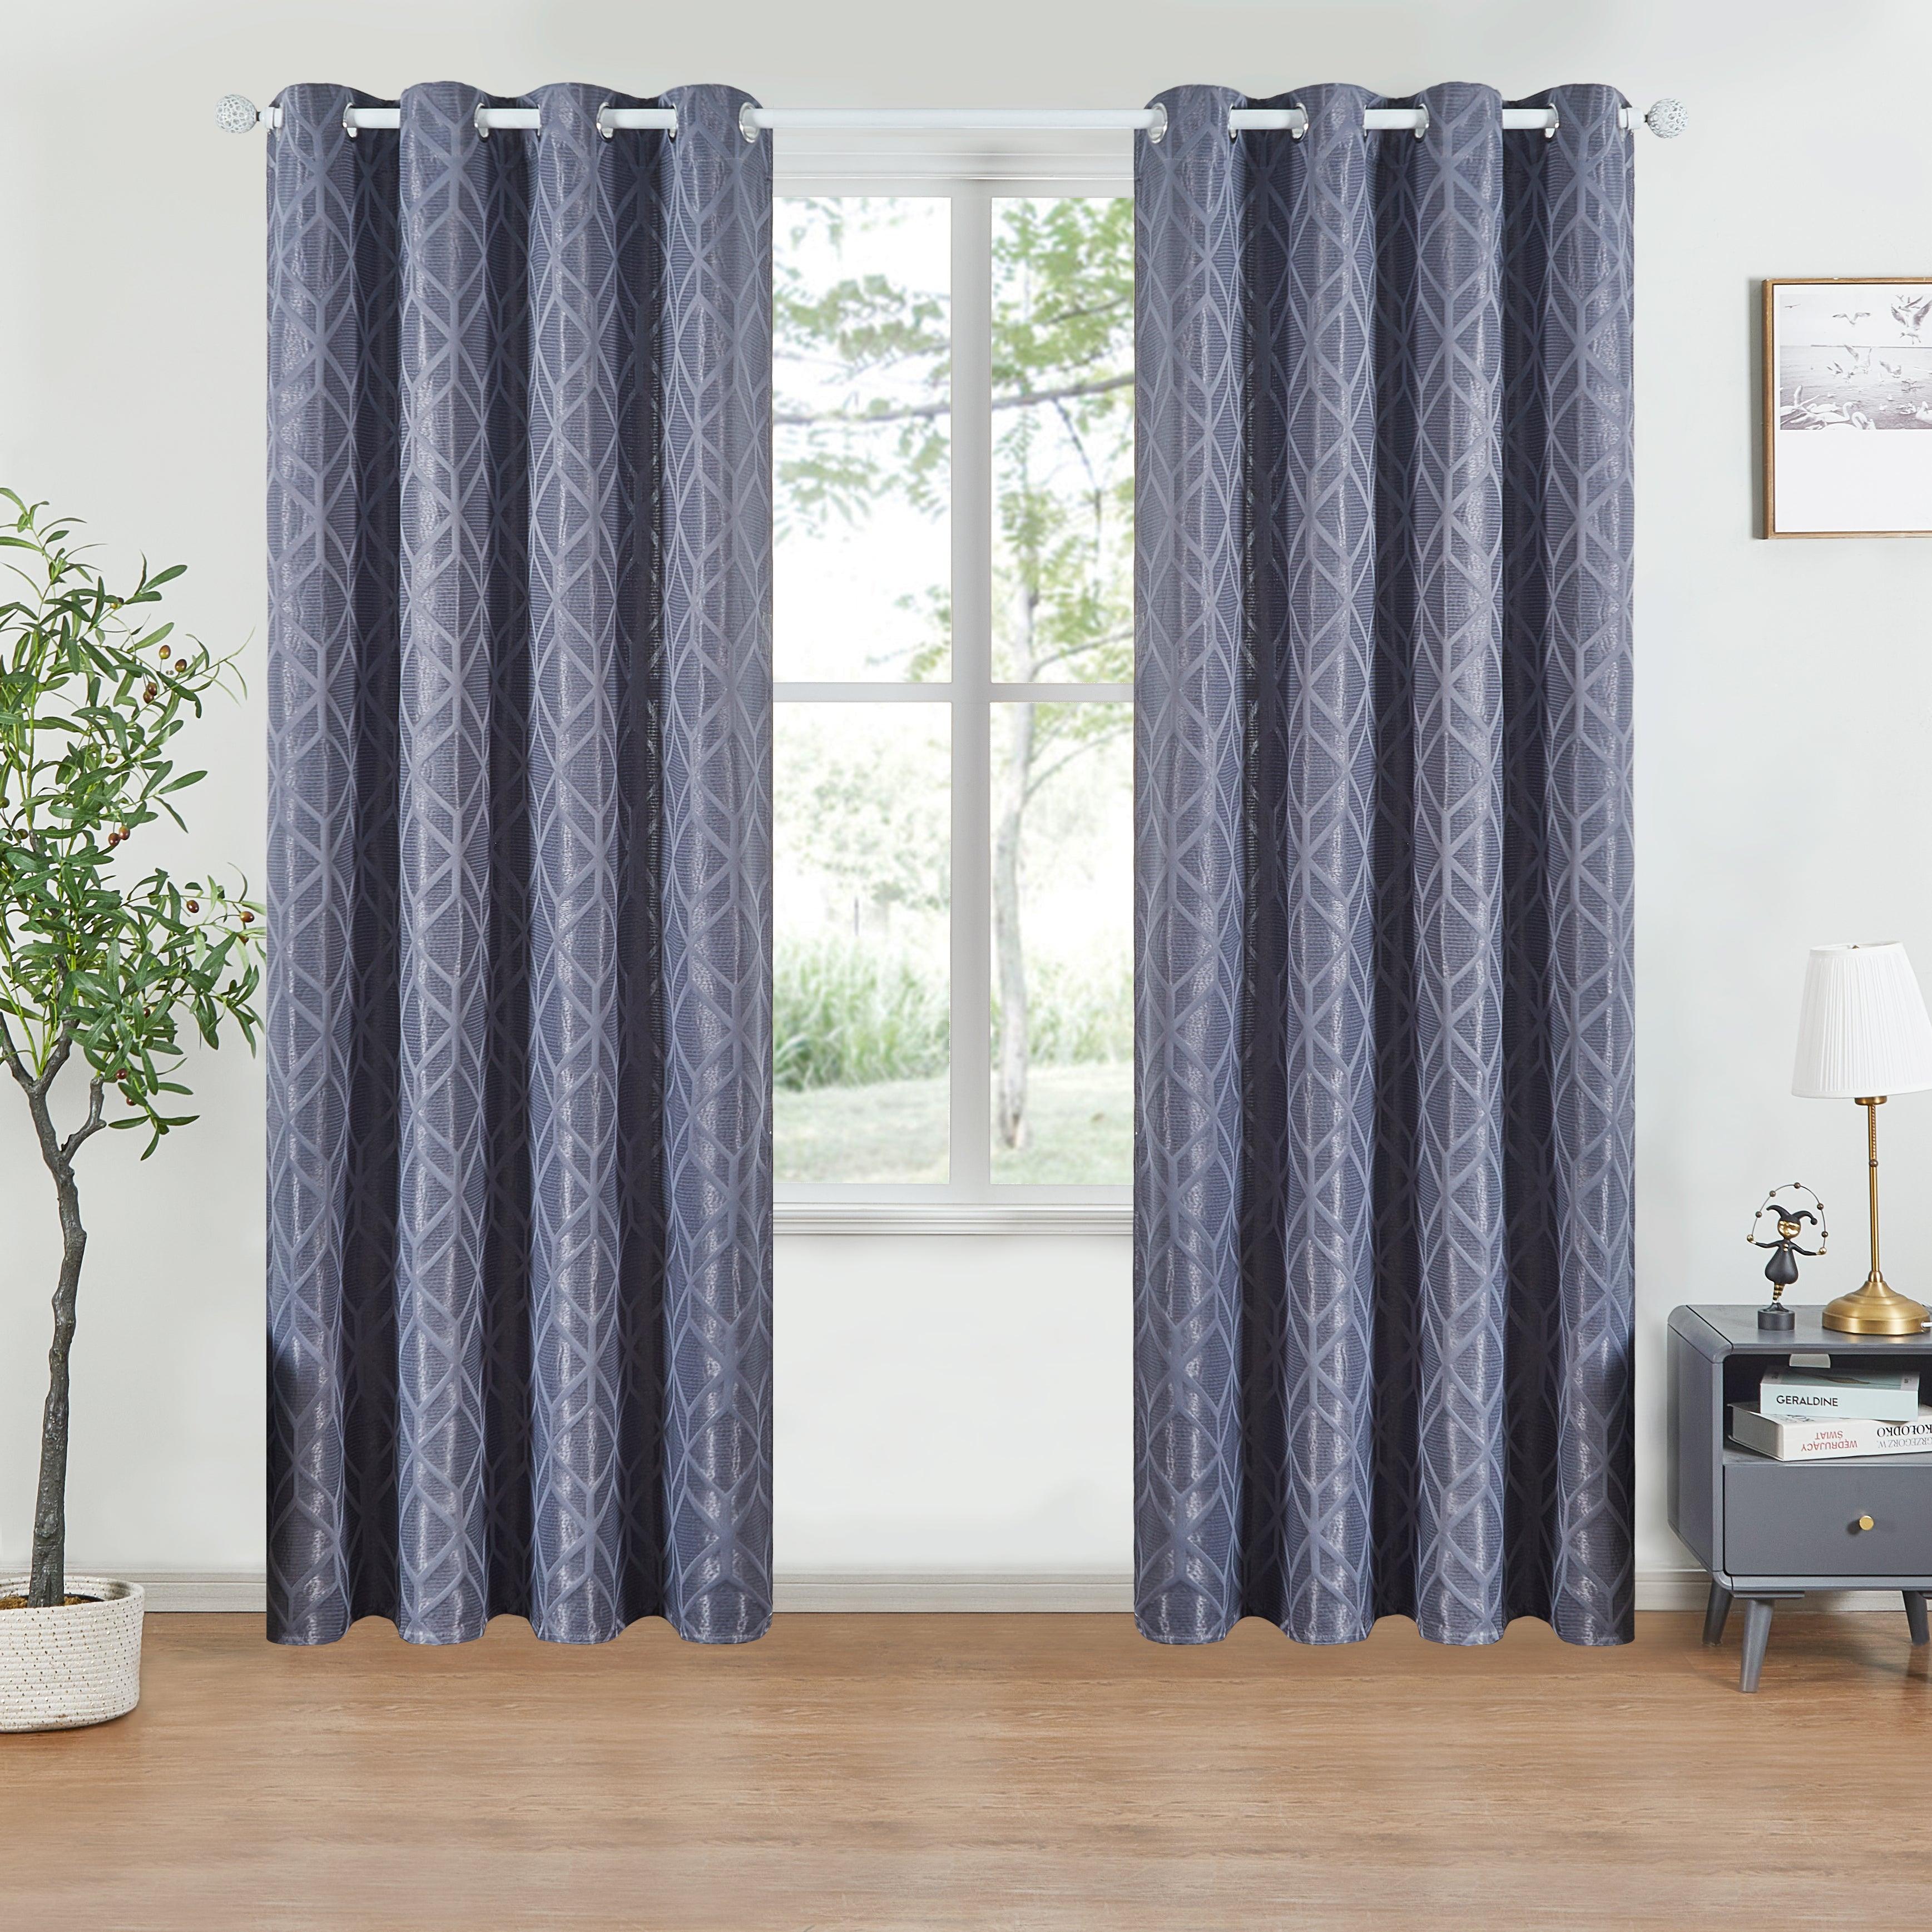 Customized Curtains -Jacquard Blackout Winter Thermal Curtains For Bedroom,1 Panel - Topfinel